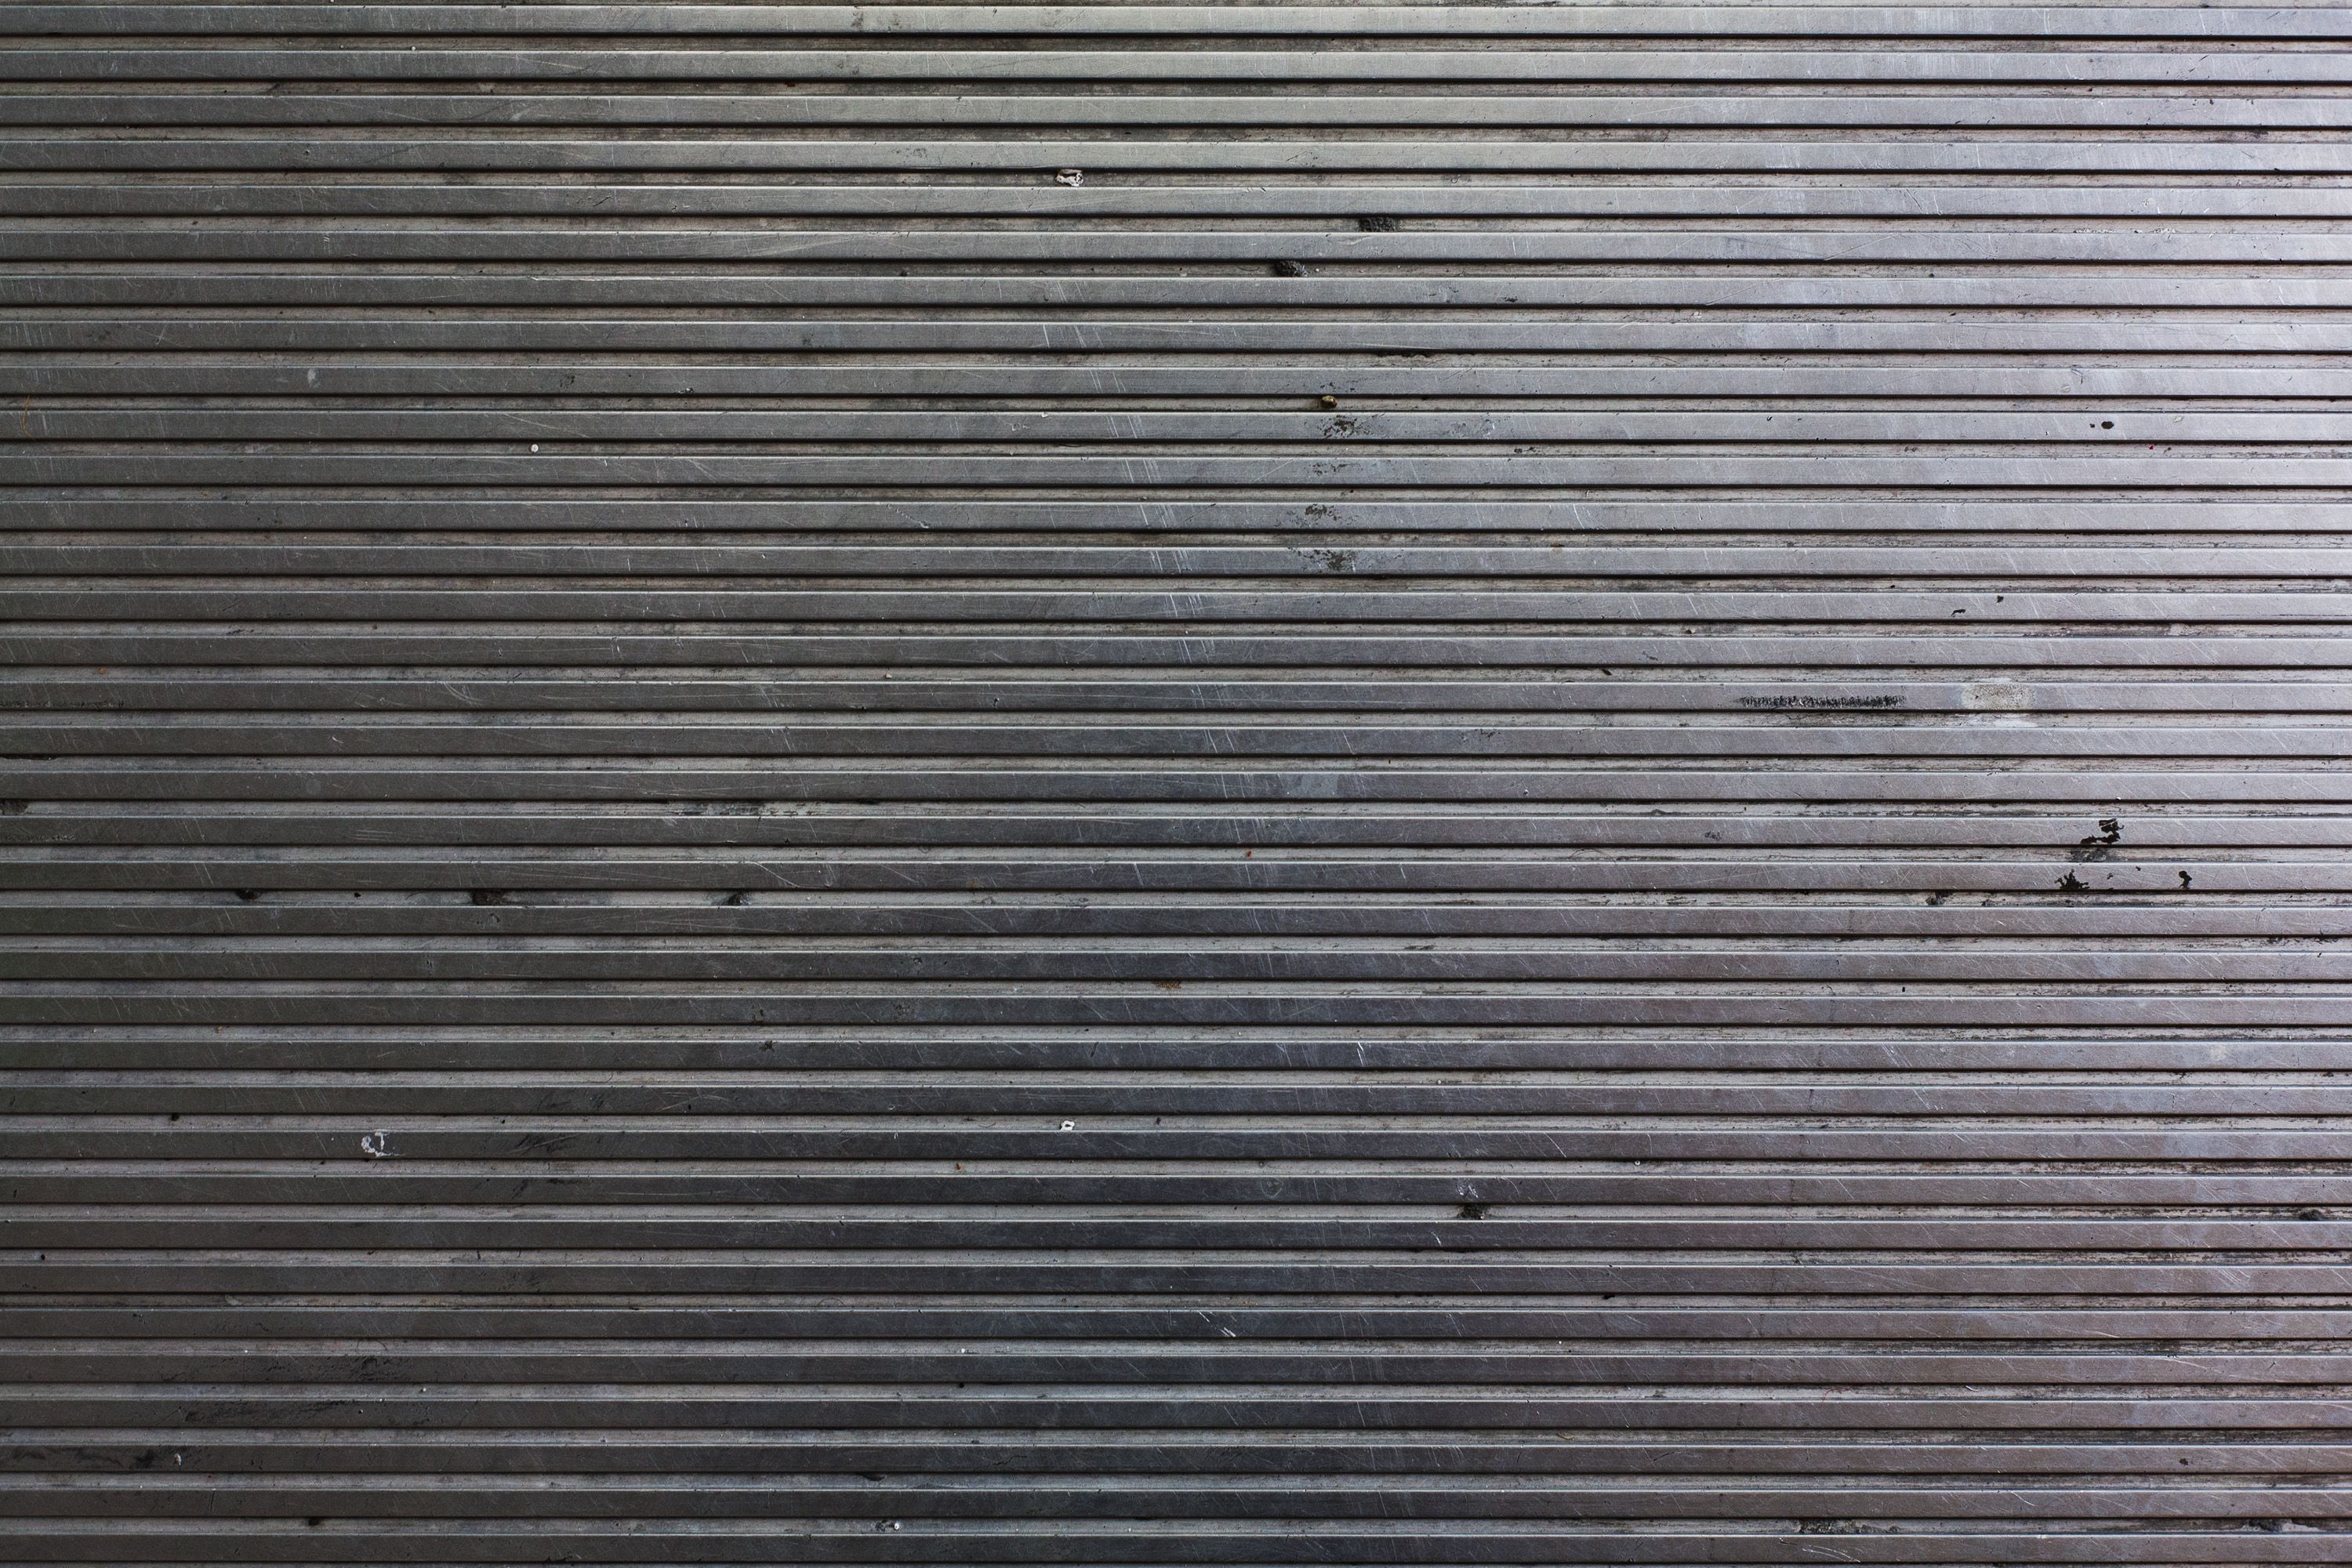 corrugated metal texture - Google Search | MATERIAL | Pinterest ...